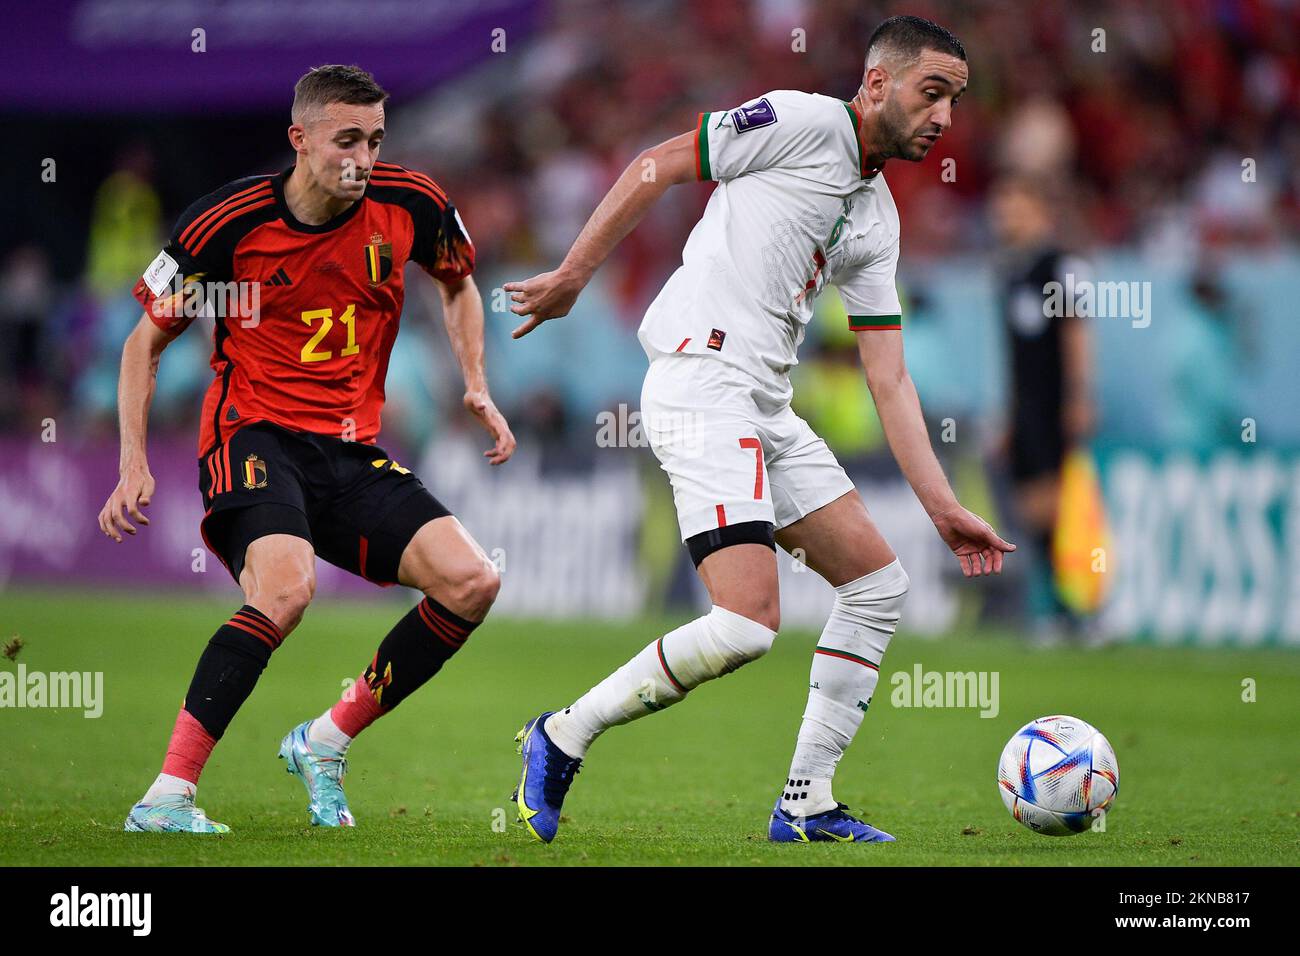 DOHA, QATAR - NOVEMBER 27: Timothy Castagne of Belgium battles for the ball with Hakim Ziyech of Morocco during the Group F - FIFA World Cup Qatar 2022 match between Belgium and Morocco at the Al Thumama Stadium on November 27, 2022 in Doha, Qatar (Photo by Pablo Morano/BSR Agency) Stock Photo